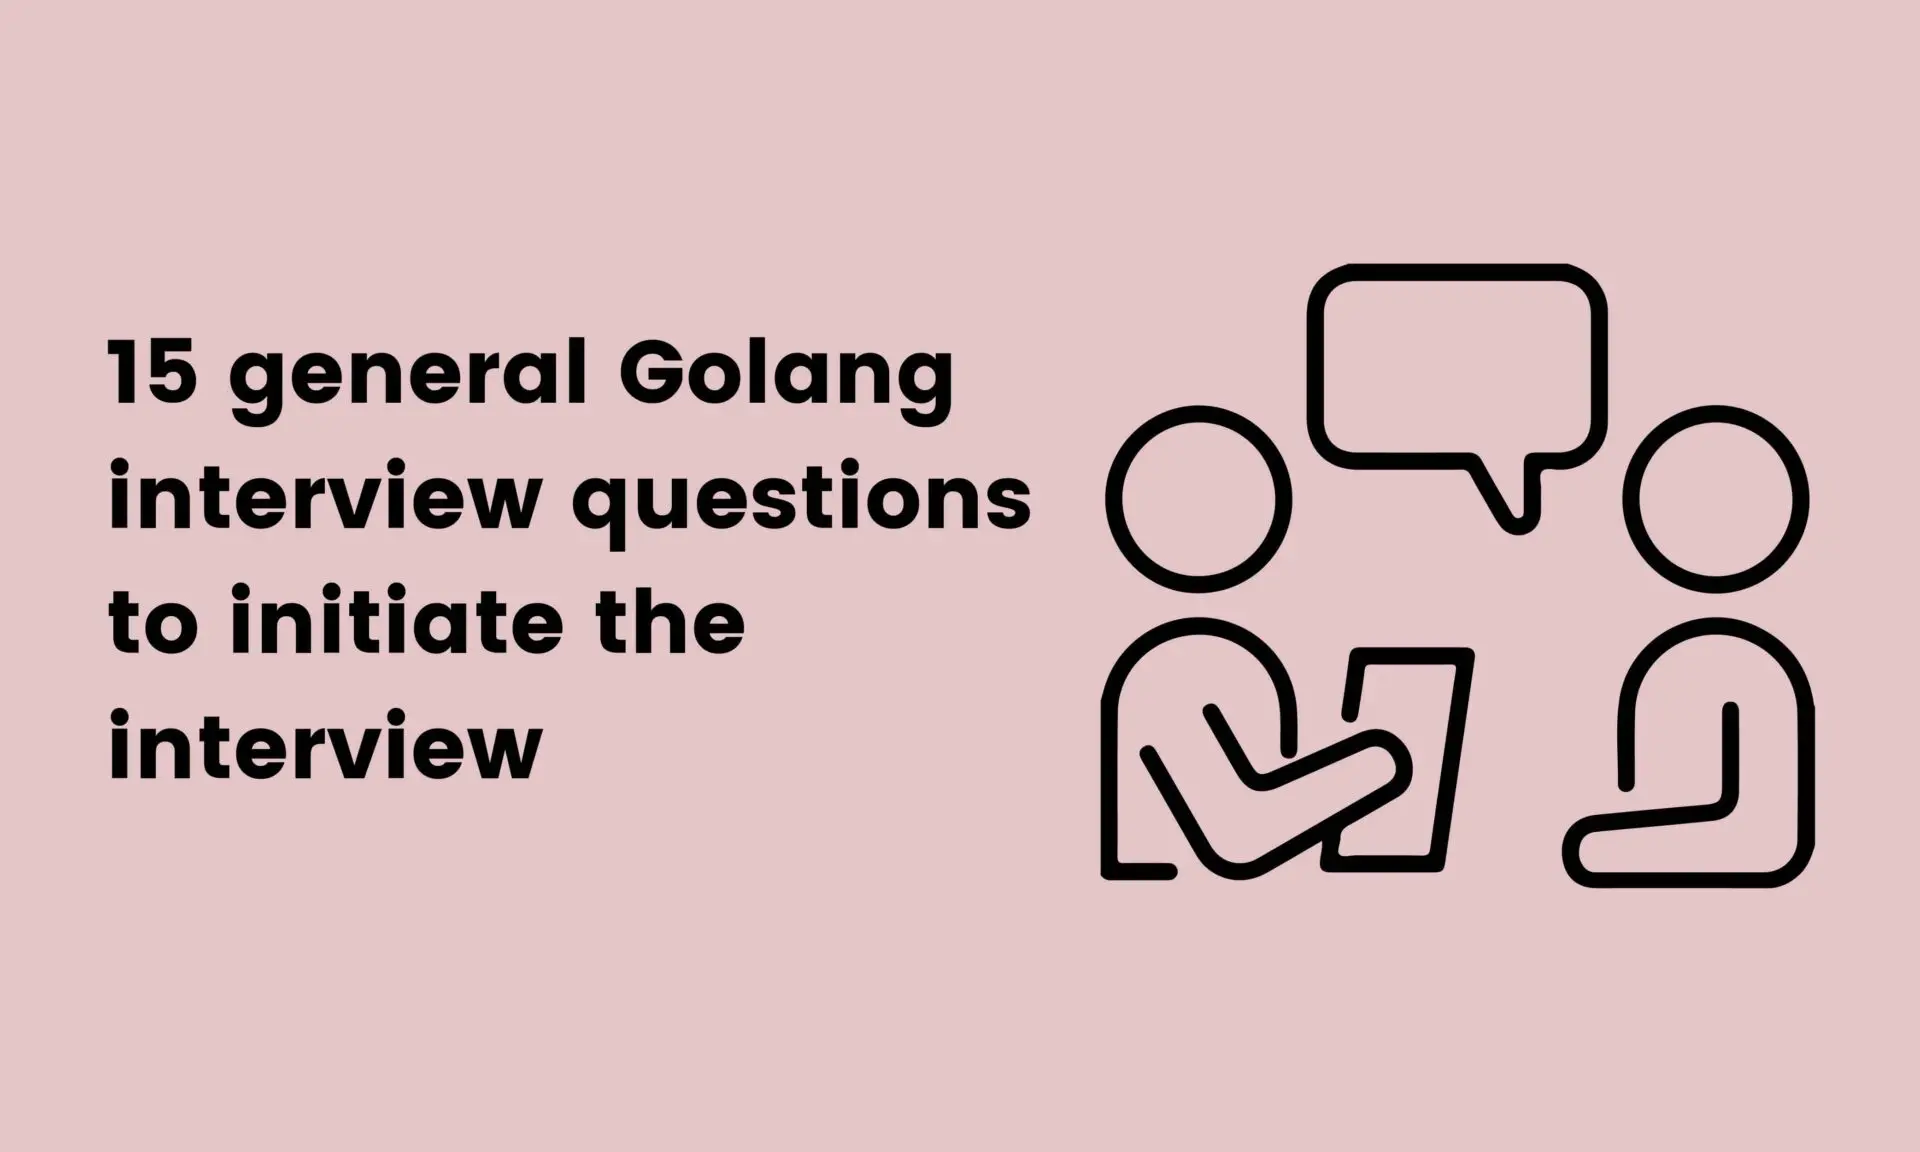 15 general Golang interview questions to initiate the interview